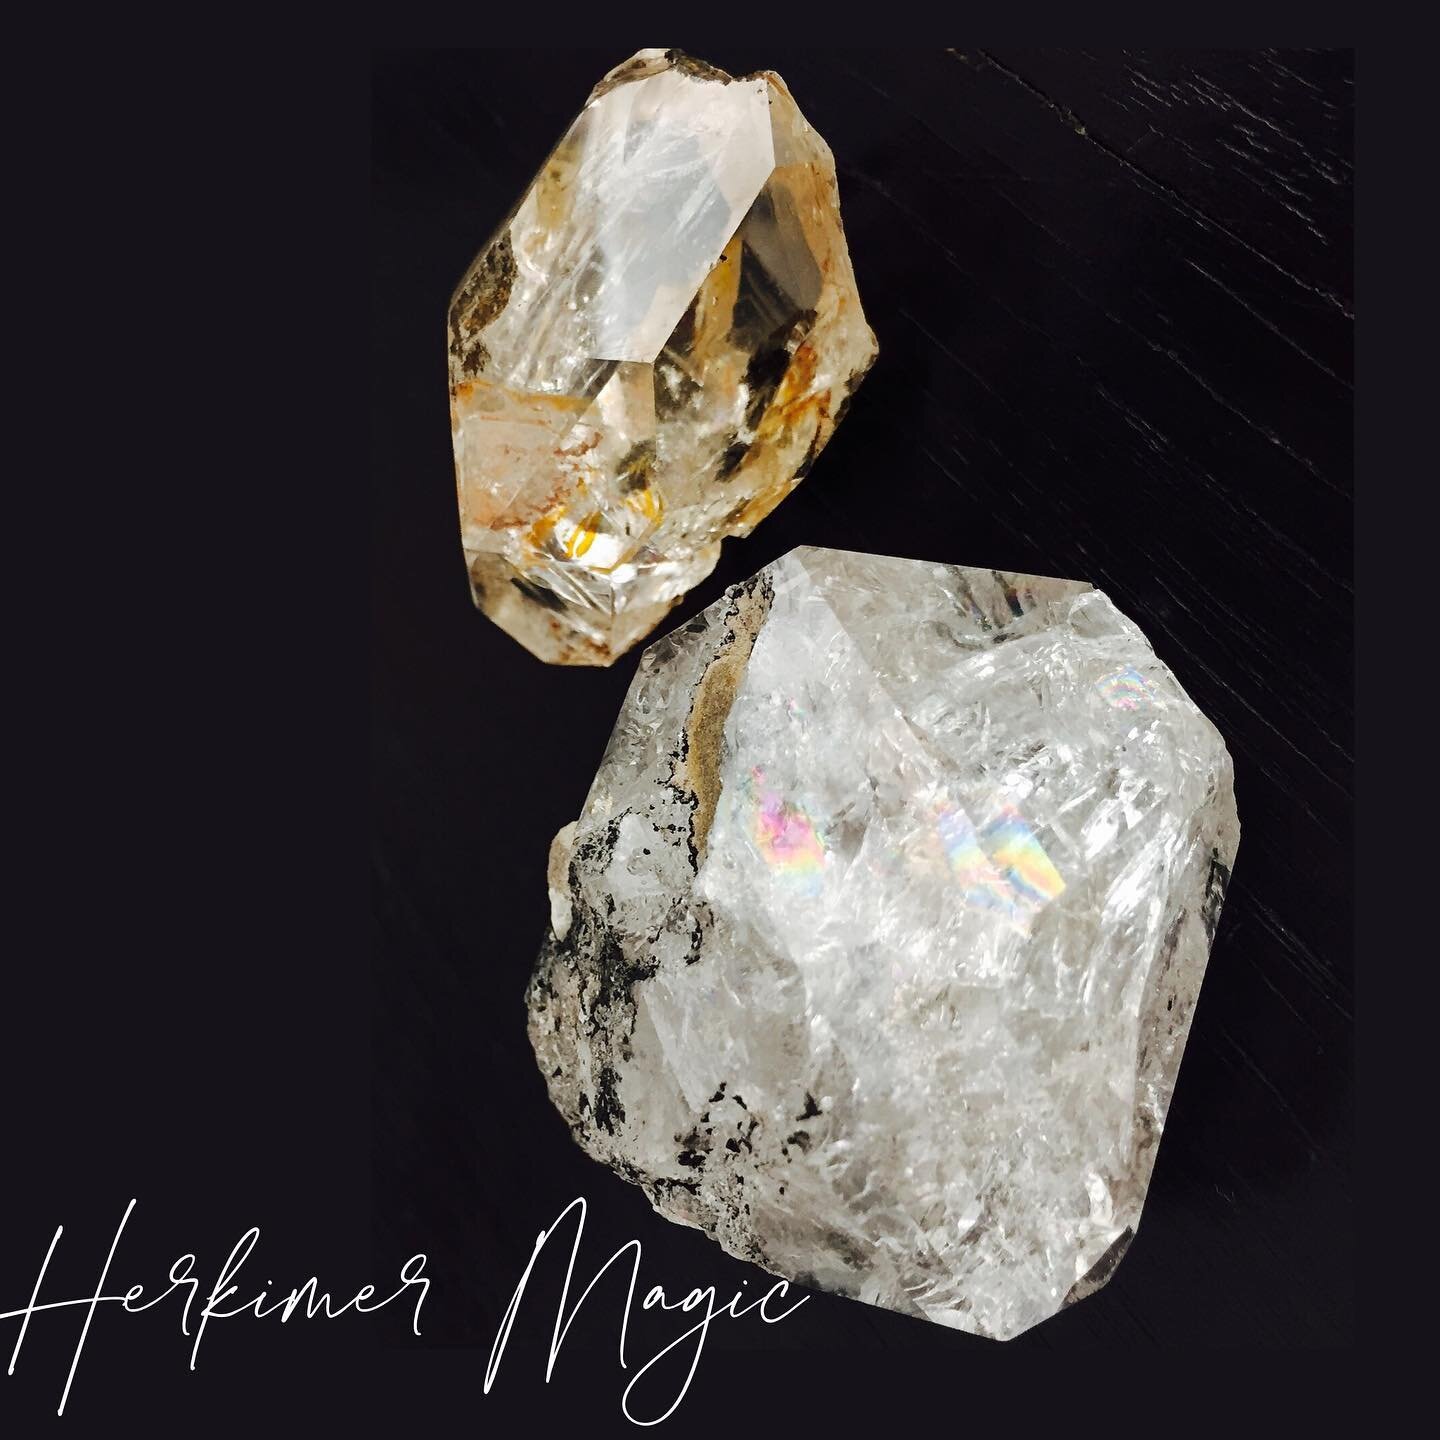 Herkimer Diamond
A Herkimer diamond is a beautiful double terminated quartz crystal that can be found in Herkimer village, New York.

You may not believe this, but this gemstone is almost five hundred million years old!

Known as the Stone of Attunem